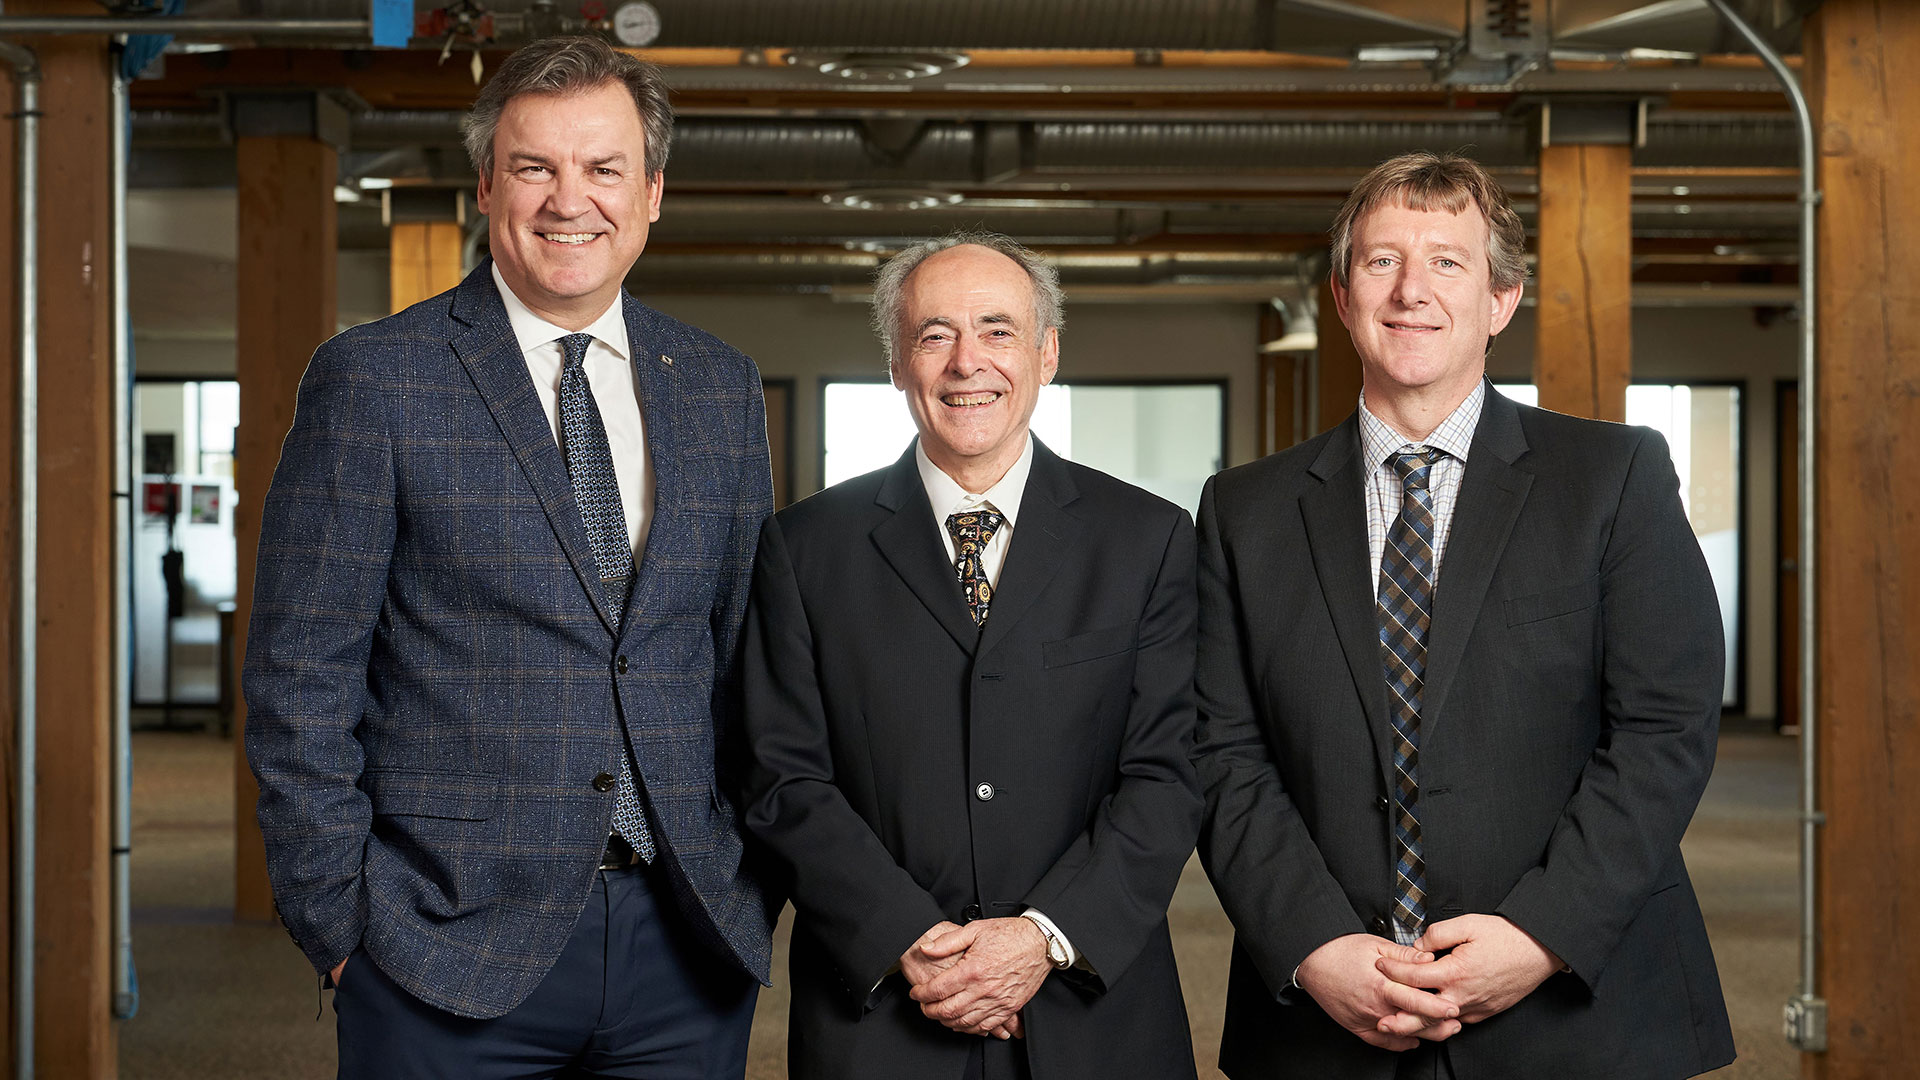 From left, Dr. James Schellenberg, Founder and CEO of Cubresa Inc., Dr. Frank Prato, Scientist at Lawson Health Research Institute and Lead of the Lawson Imaging research program, and  Dr. Gerald Moran, Head of Research for Siemens Healthineers Canada.